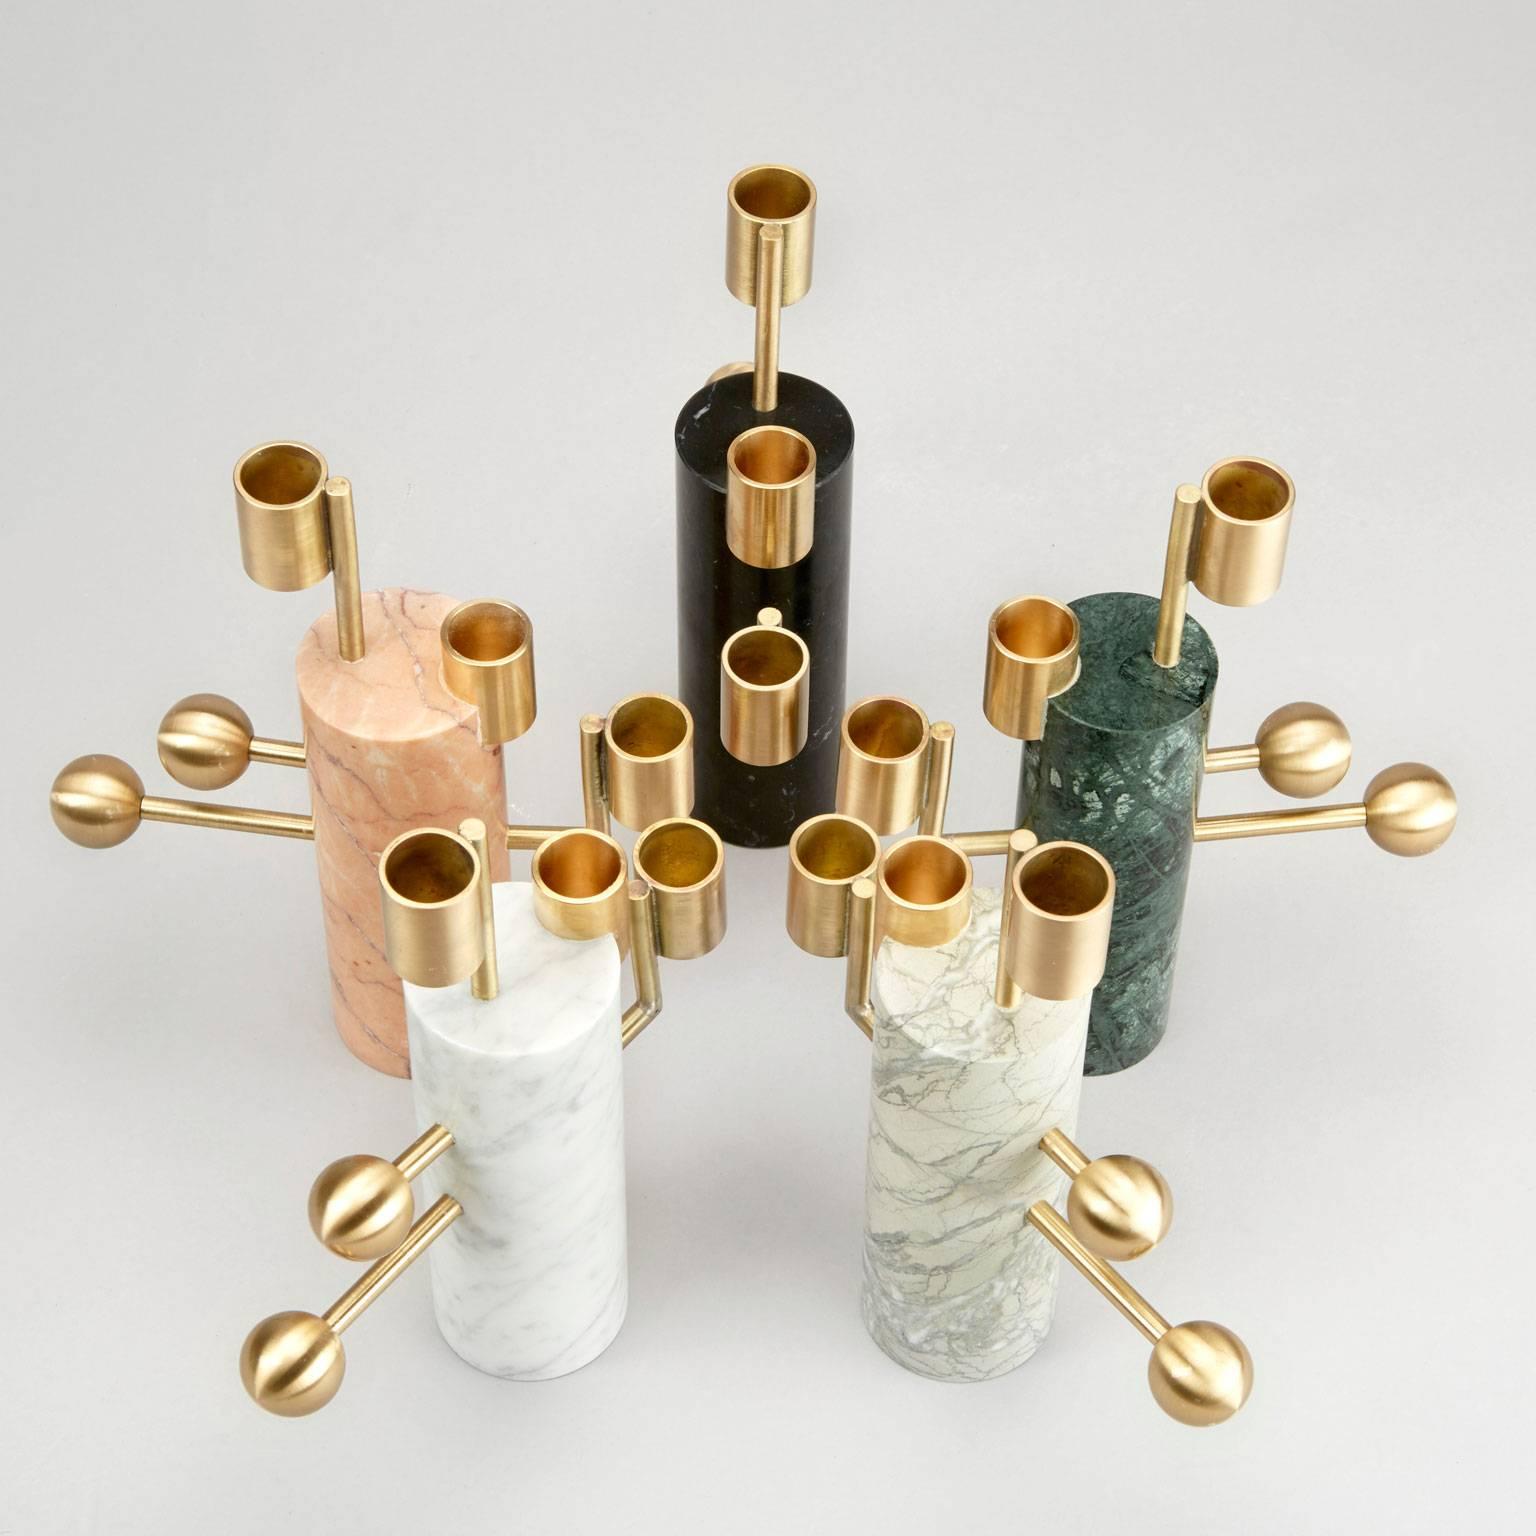 A beautiful union of brass and marble, the ‘Stargazer’ candle holders are inspired by orreries, mechanical models of the solar system used since classical times. Available in two designs, these candlesticks have a powerful sculptural presence far